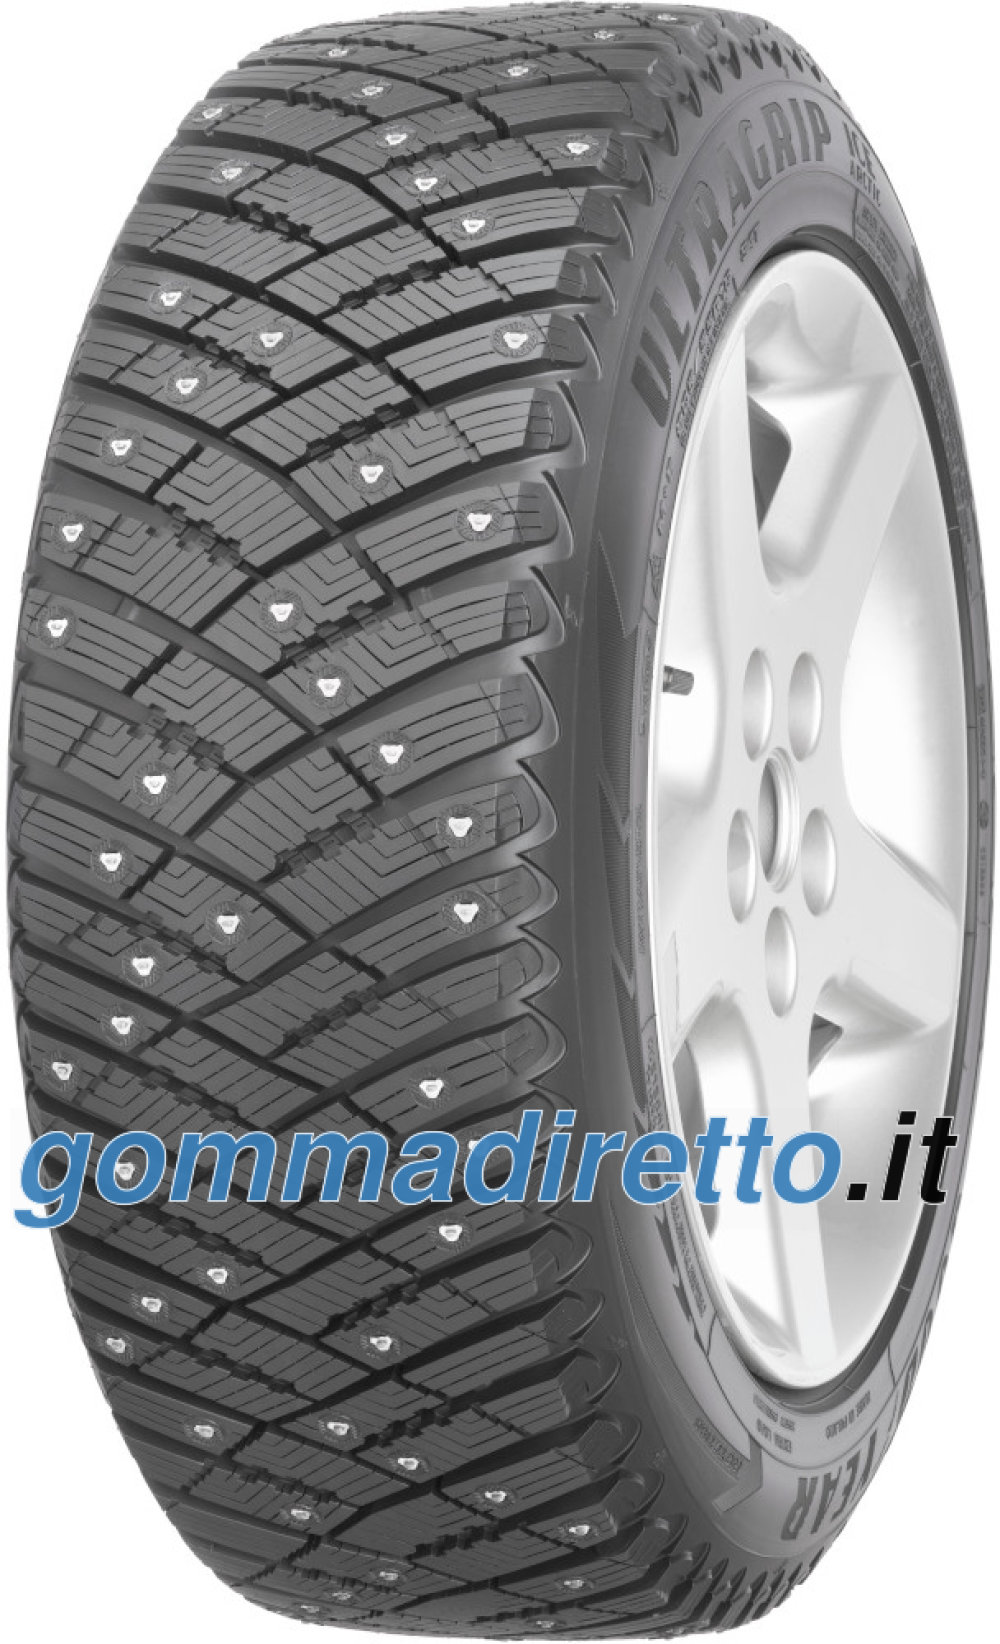 Image of Goodyear Ultra Grip Ice Arctic ( 175/65 R14 86T XL, pneumatico chiodato )